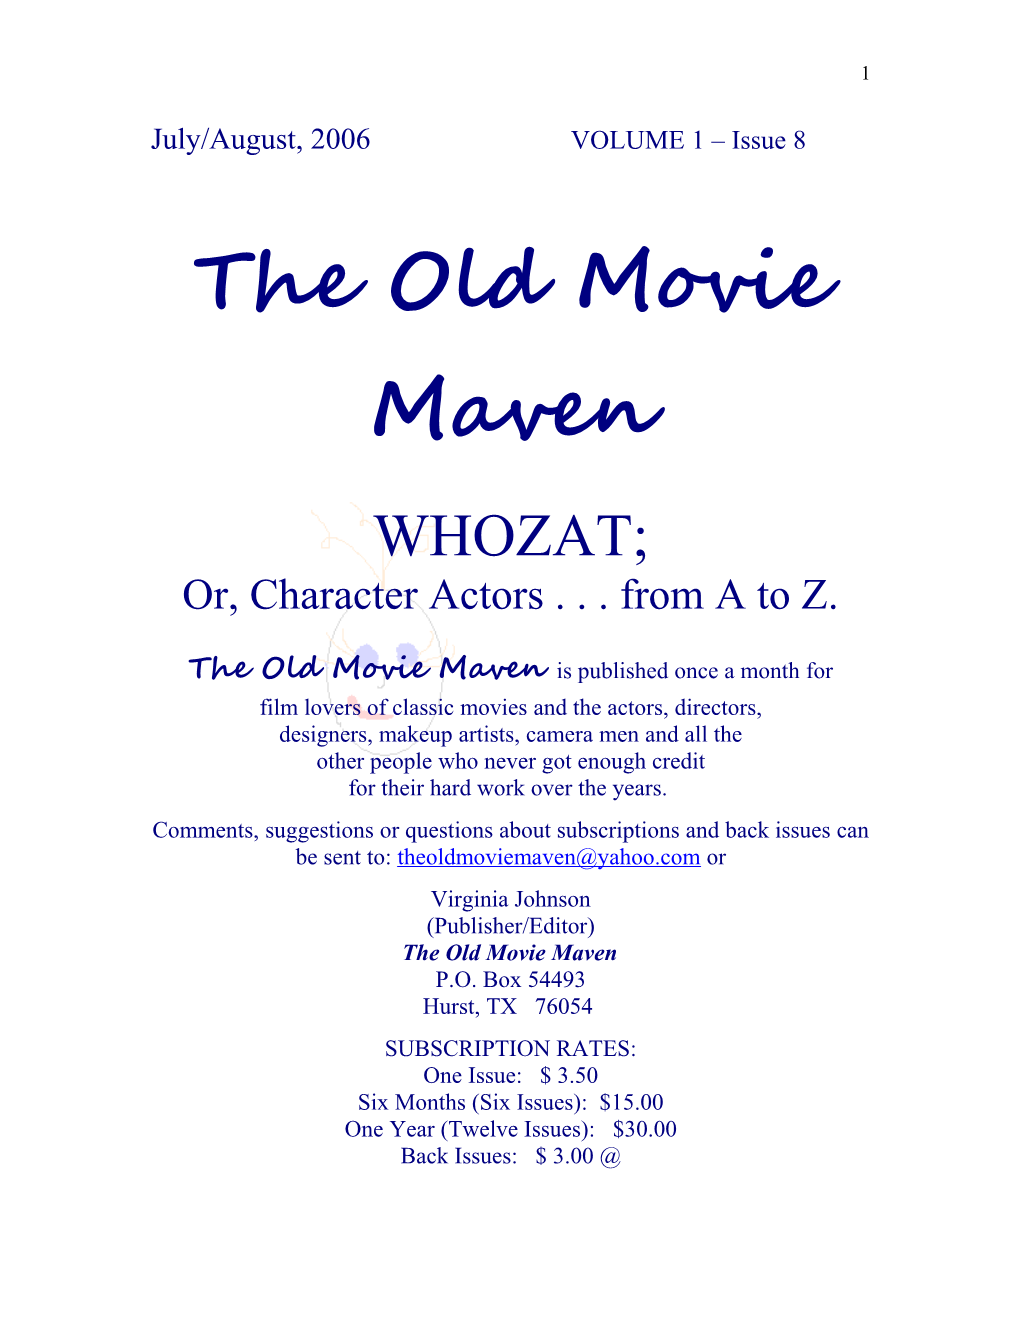 The Old Movie Maven